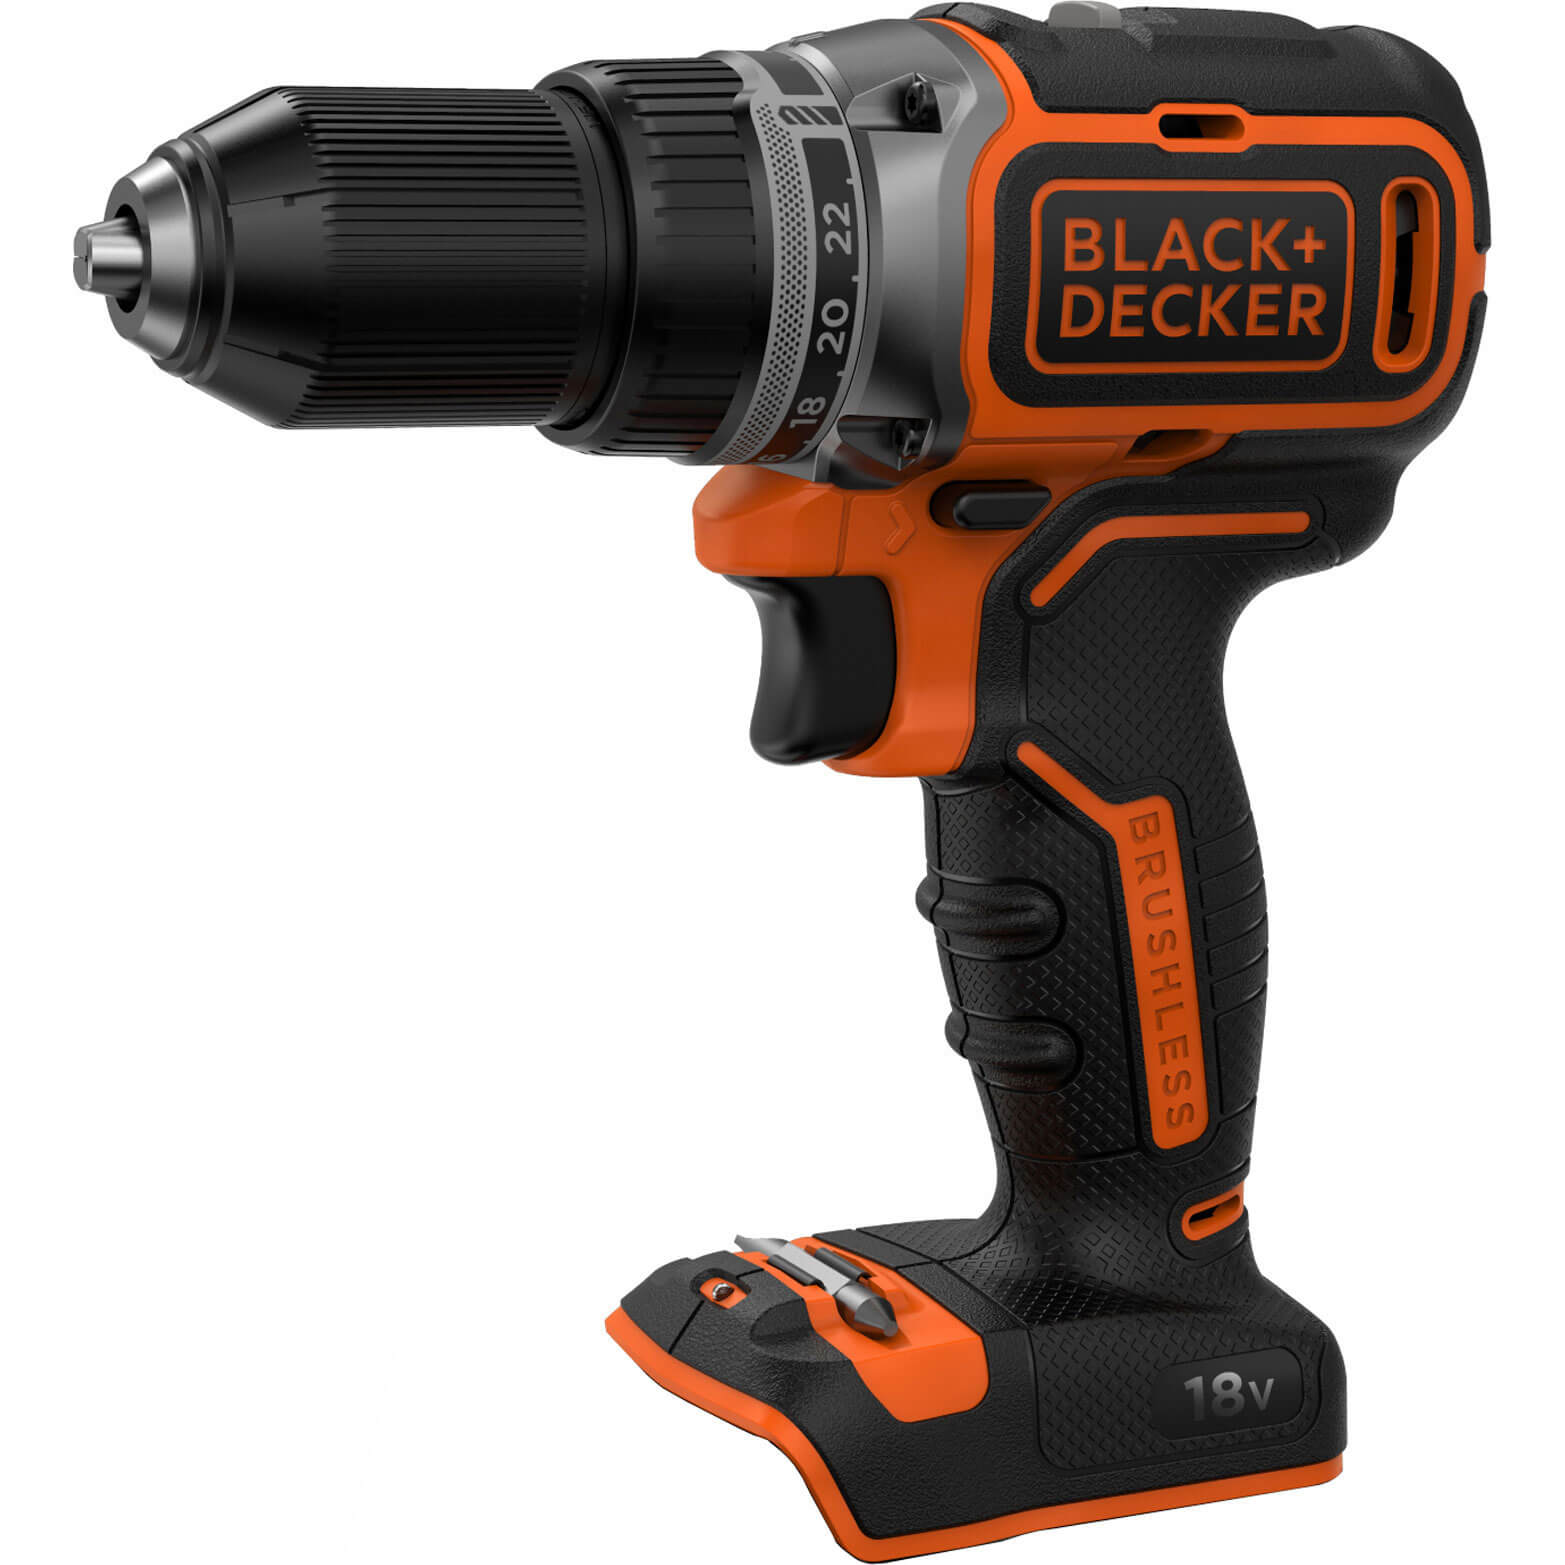 Image of Black and Decker BL186 18v Cordless Brushless Drill Driver No Batteries No Charger No Case